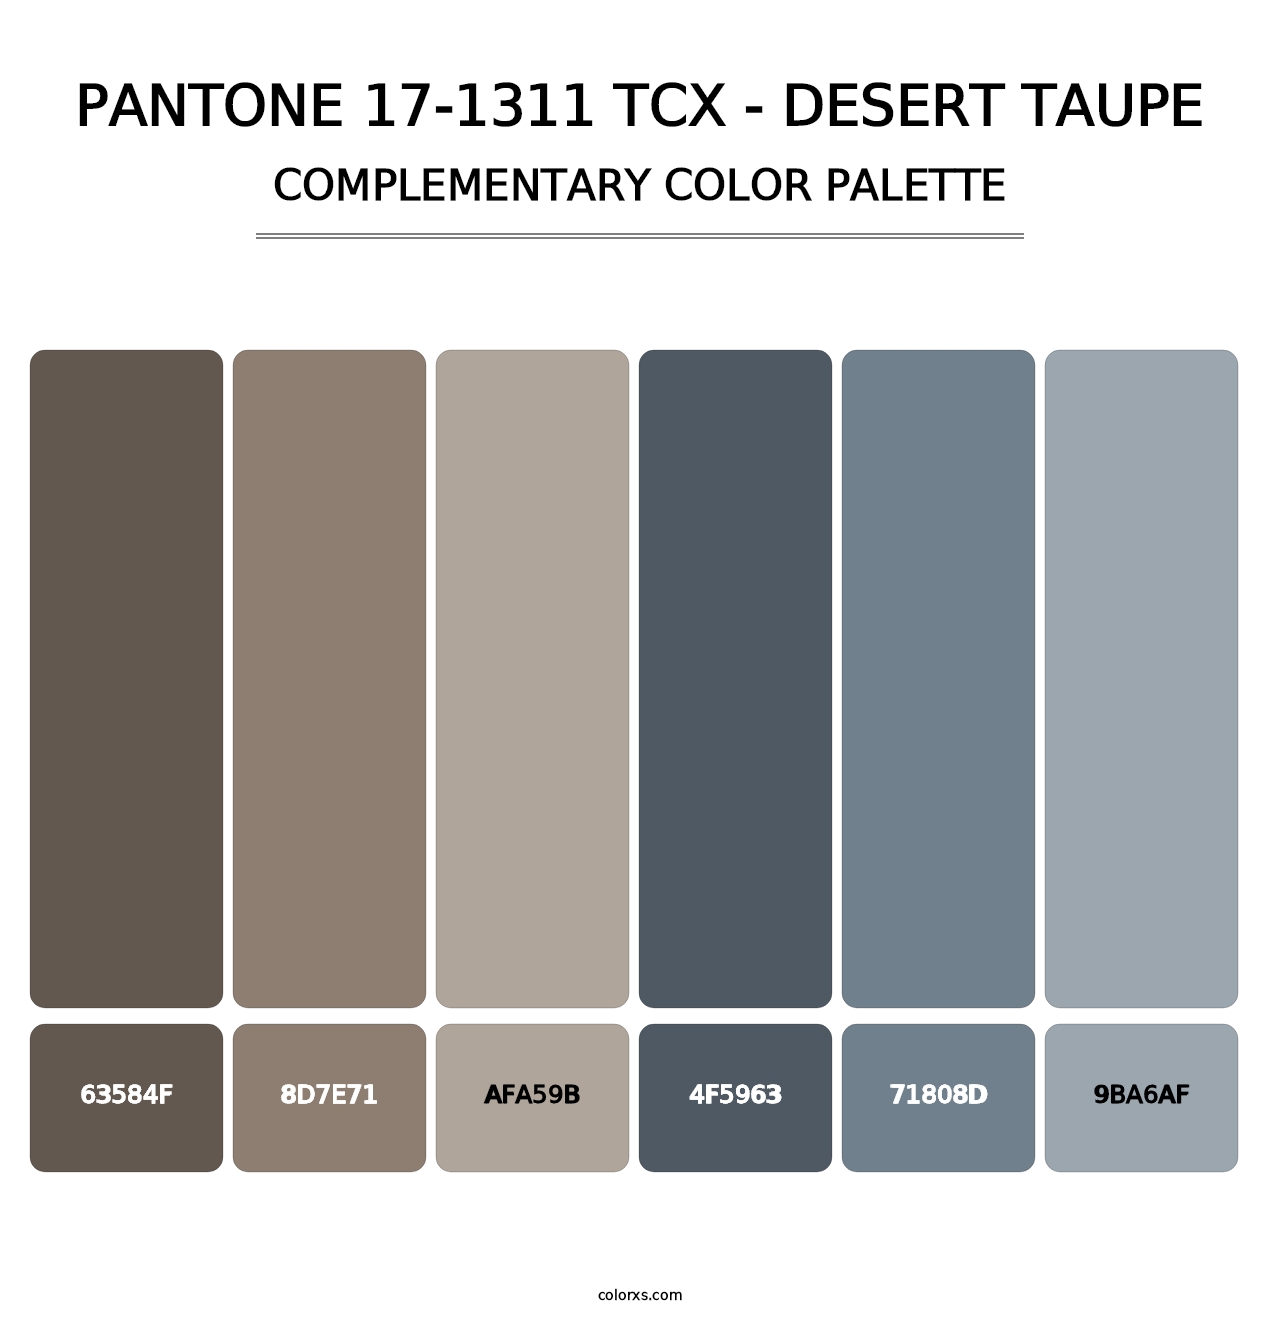 PANTONE 17-1311 TCX - Desert Taupe - Complementary Color Palette